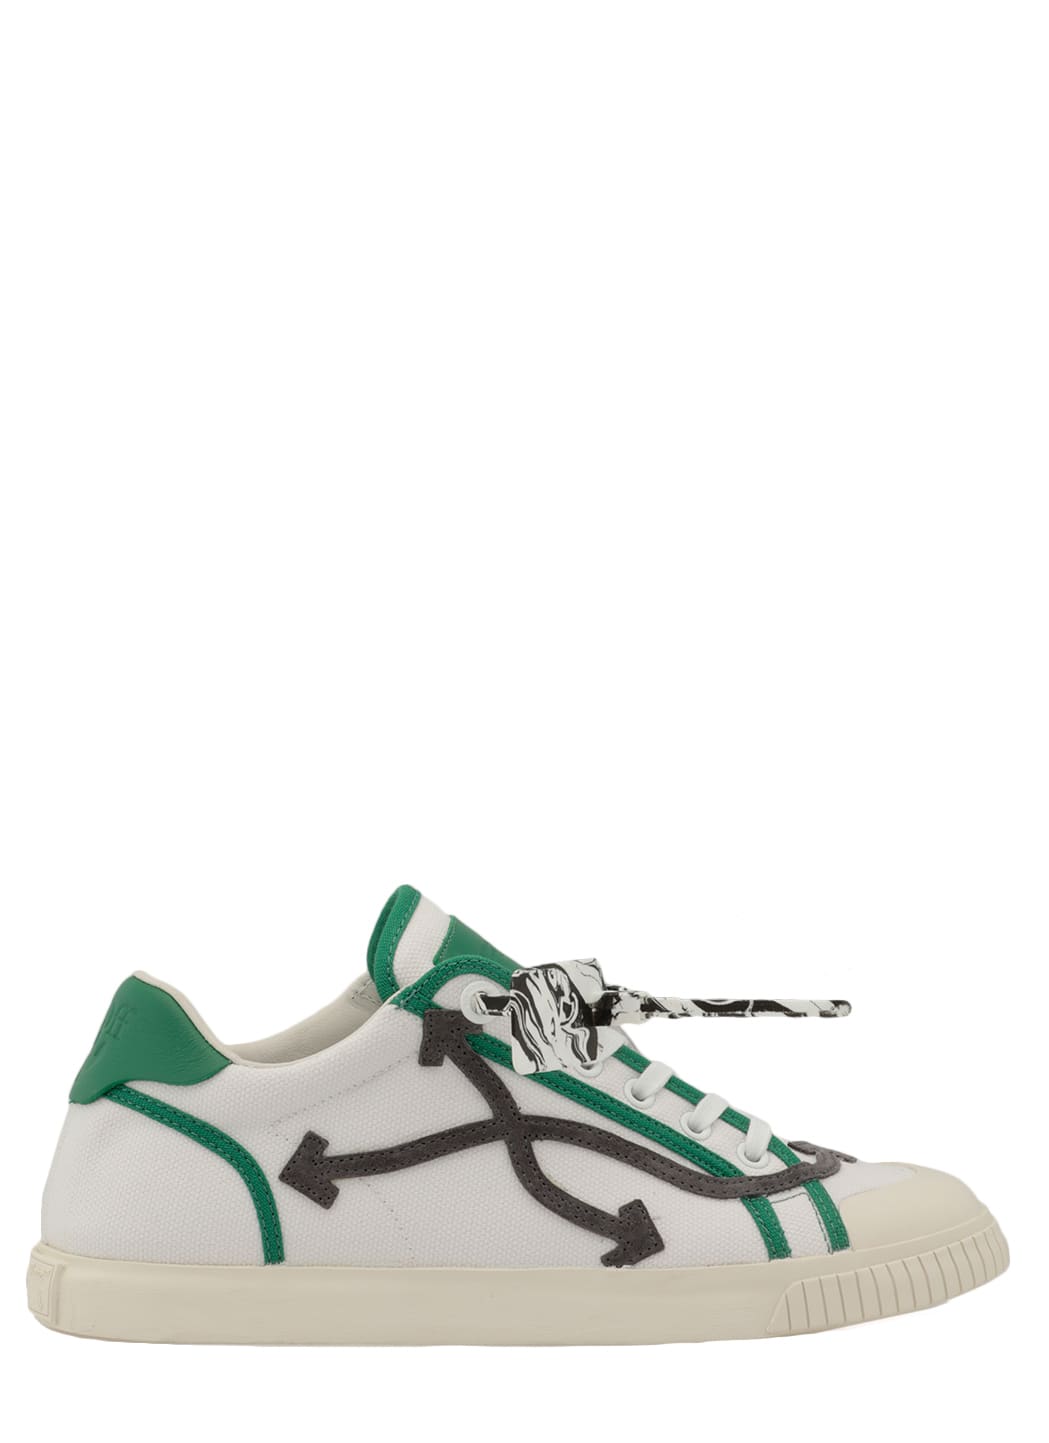 Off-White Leather And Fabric Sneaker